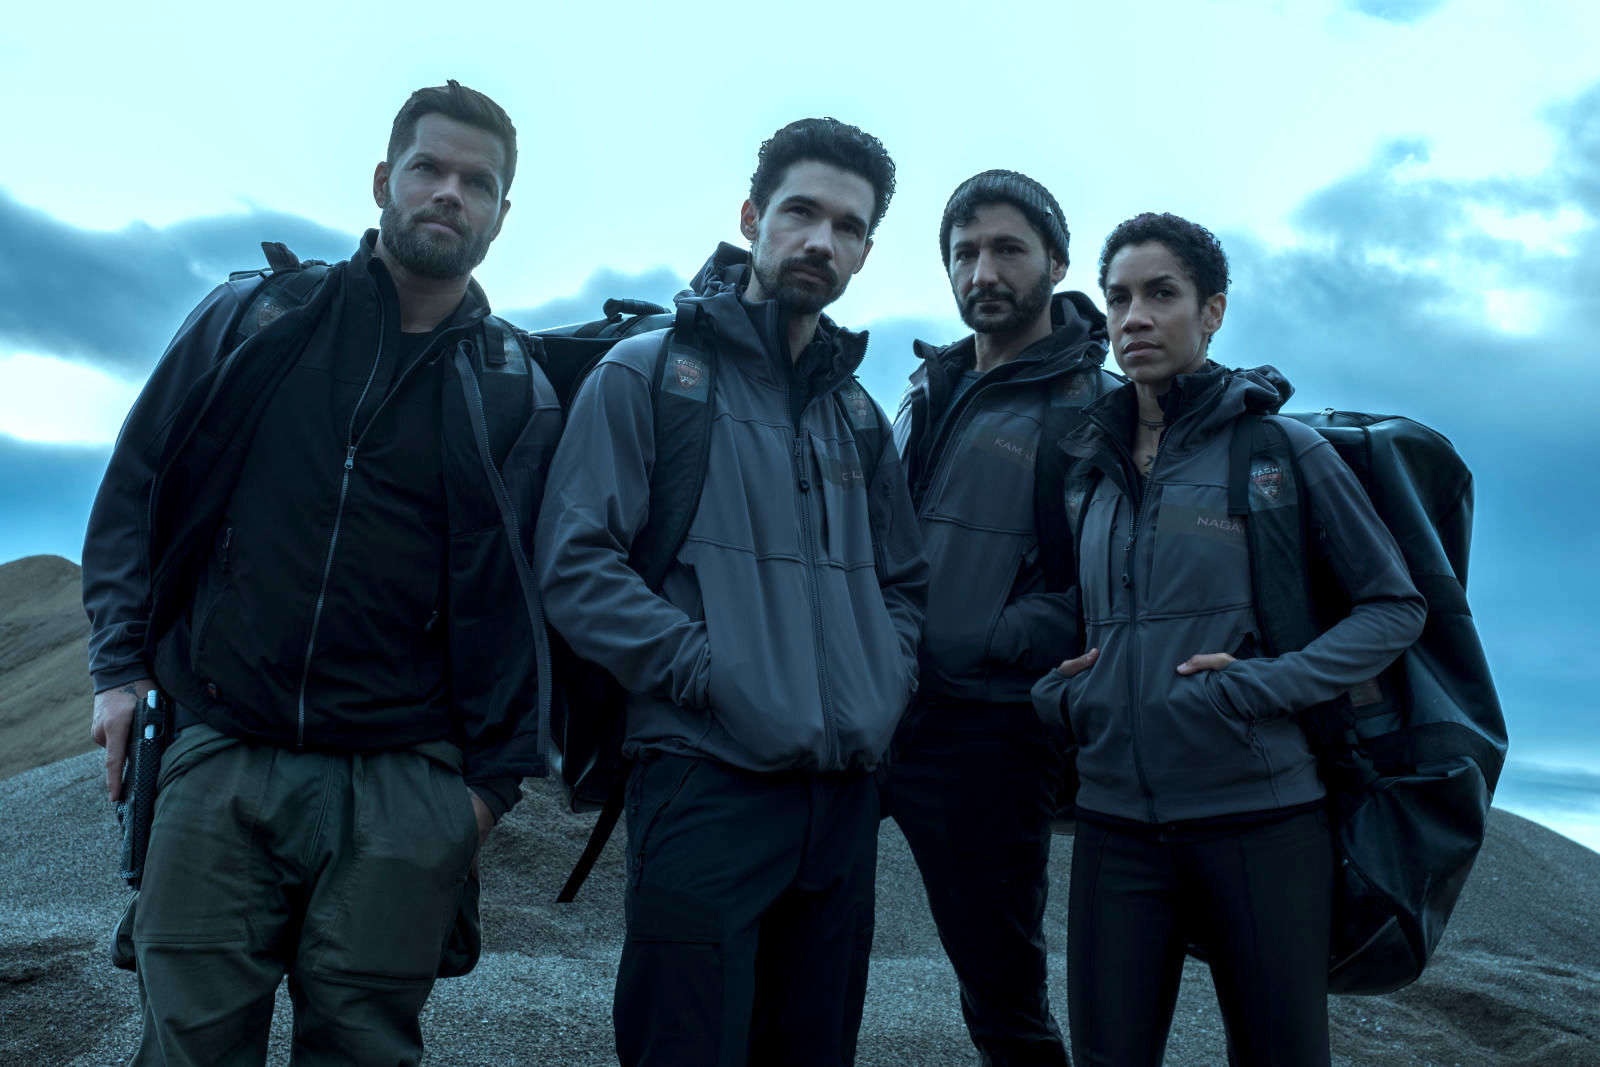 The crew of the Roci are on a new adventure on The Expanse